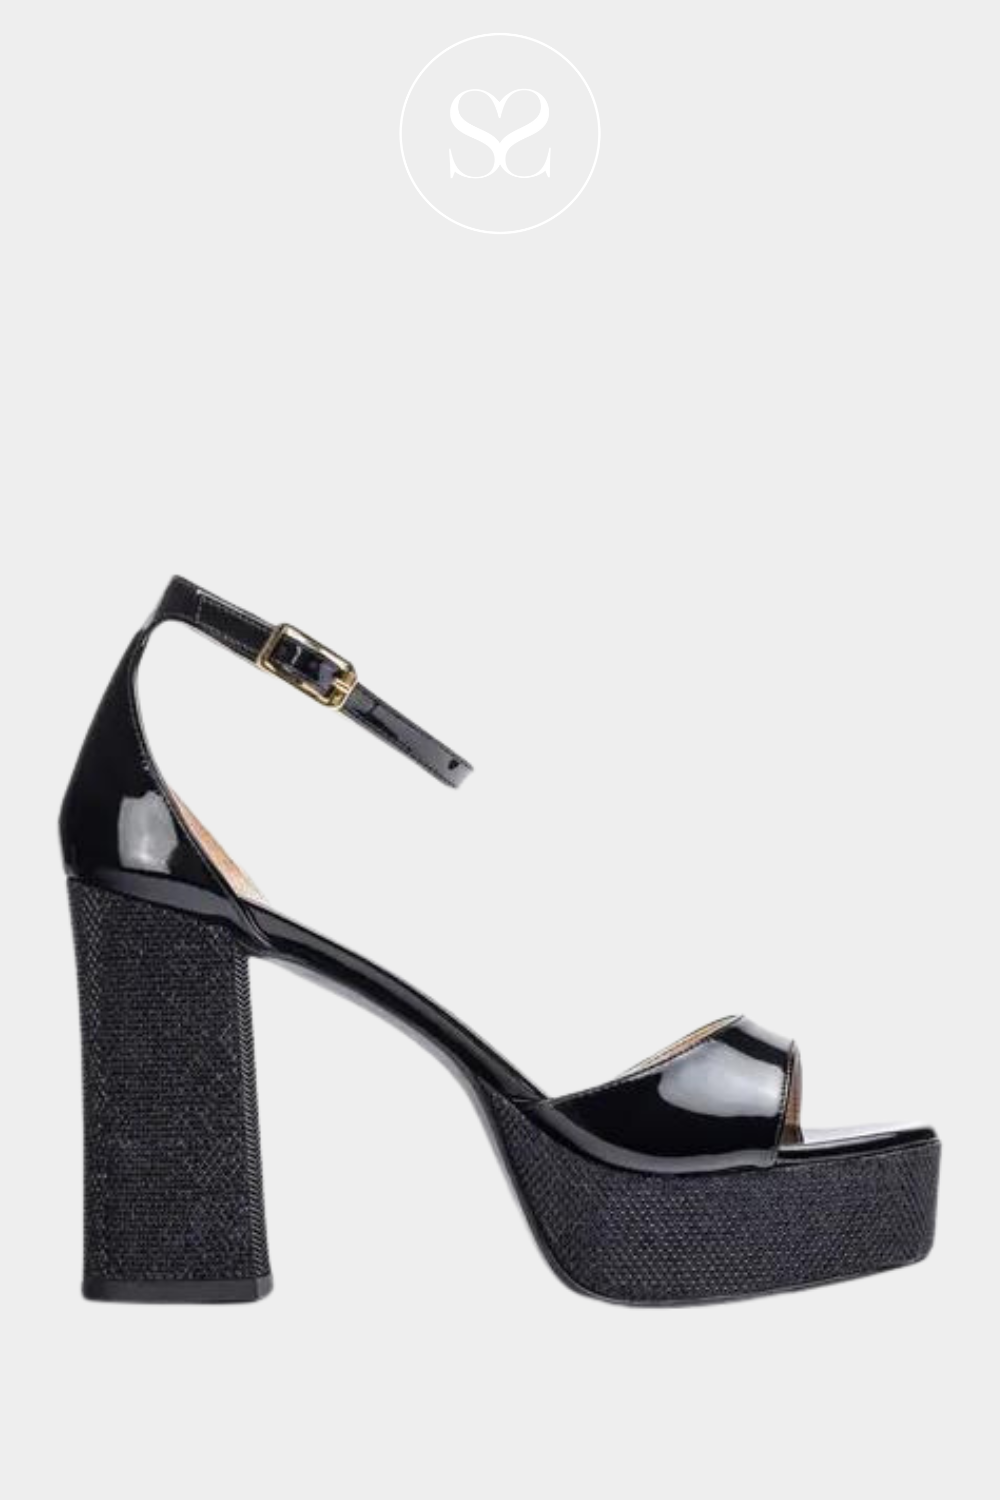 UNISA UPTON BLACK PATENT PLATFORM BLOCK HEEL SANDAL WITH AN ANKLE STRAP AND A SPARKLE SOLE